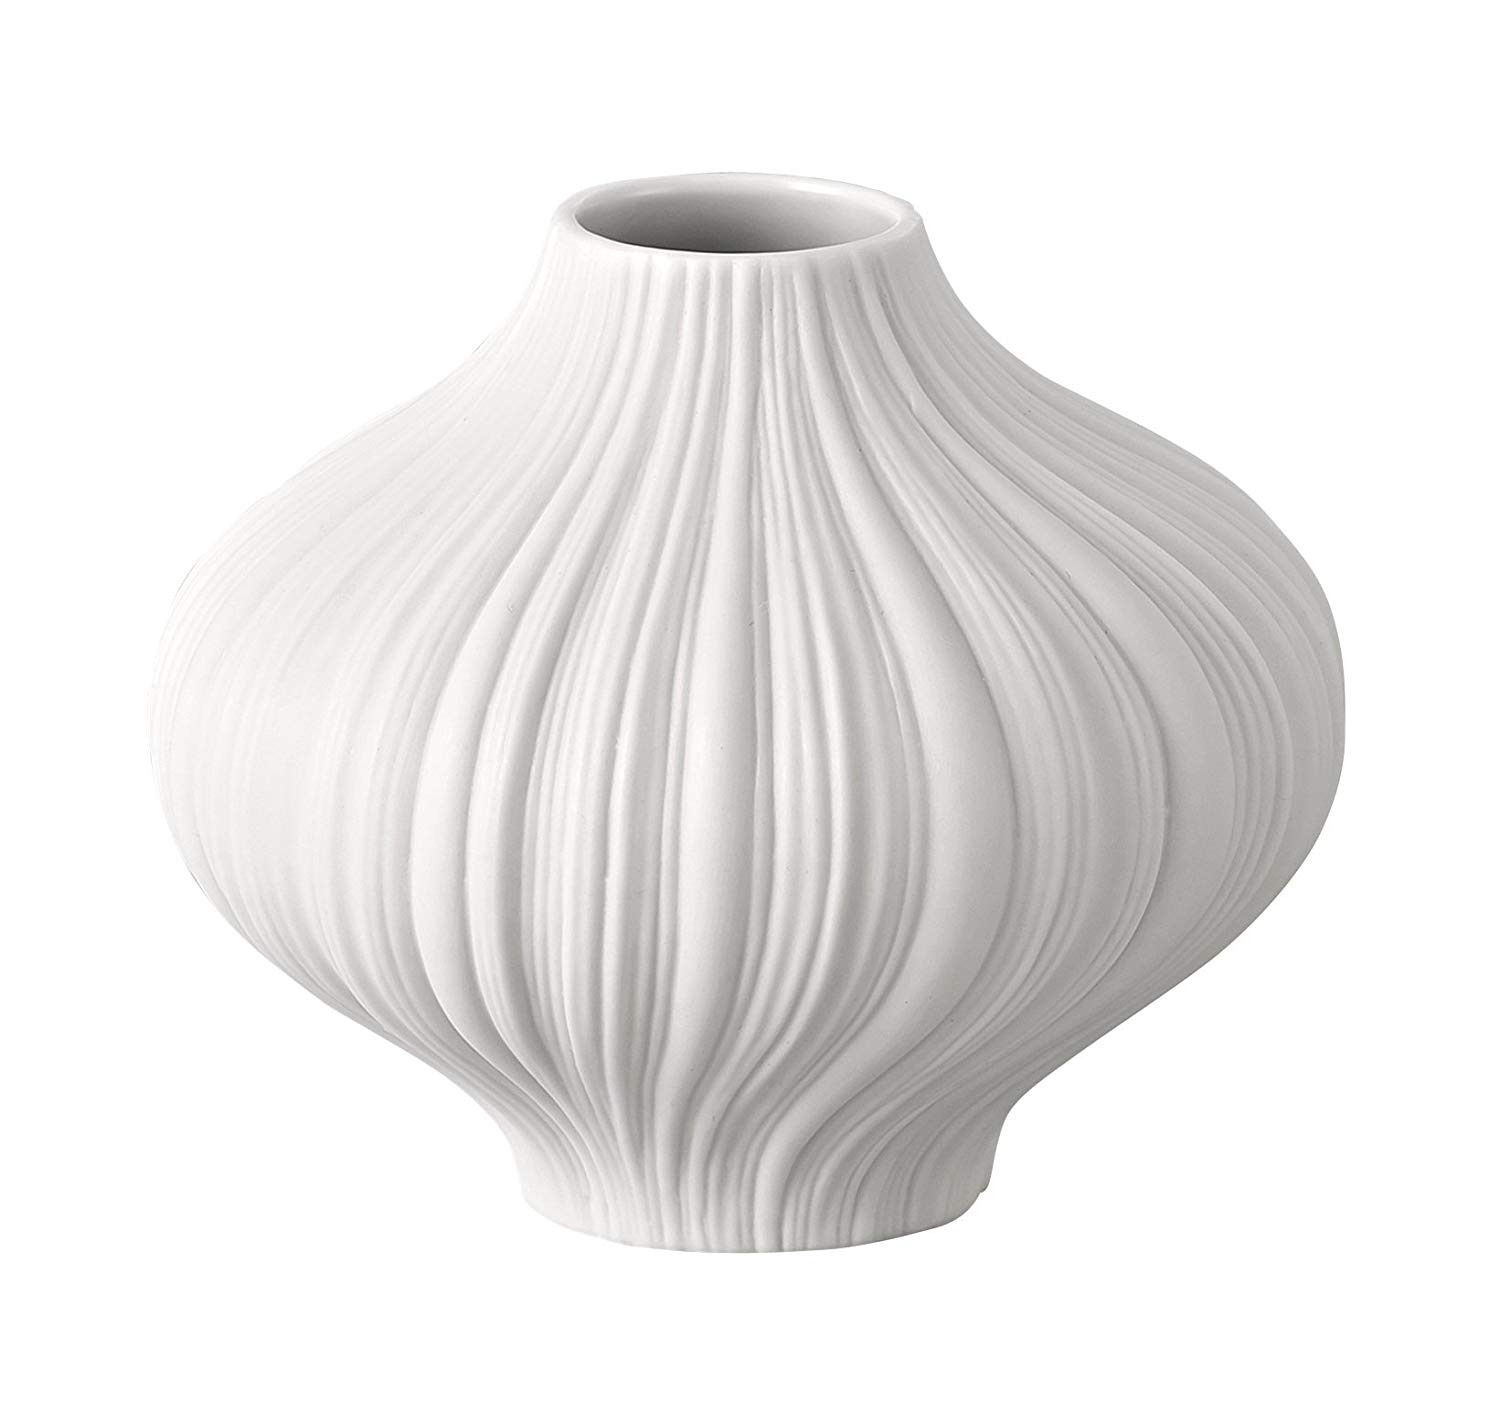 26 Lovable Marquis by Waterford Sheridan Flared 11 Inch Vase 2024 free download marquis by waterford sheridan flared 11 inch vase of amazon com rosenthal flower mini vase plissee 3 inch home kitchen for 71ogojxj7nl sl1500